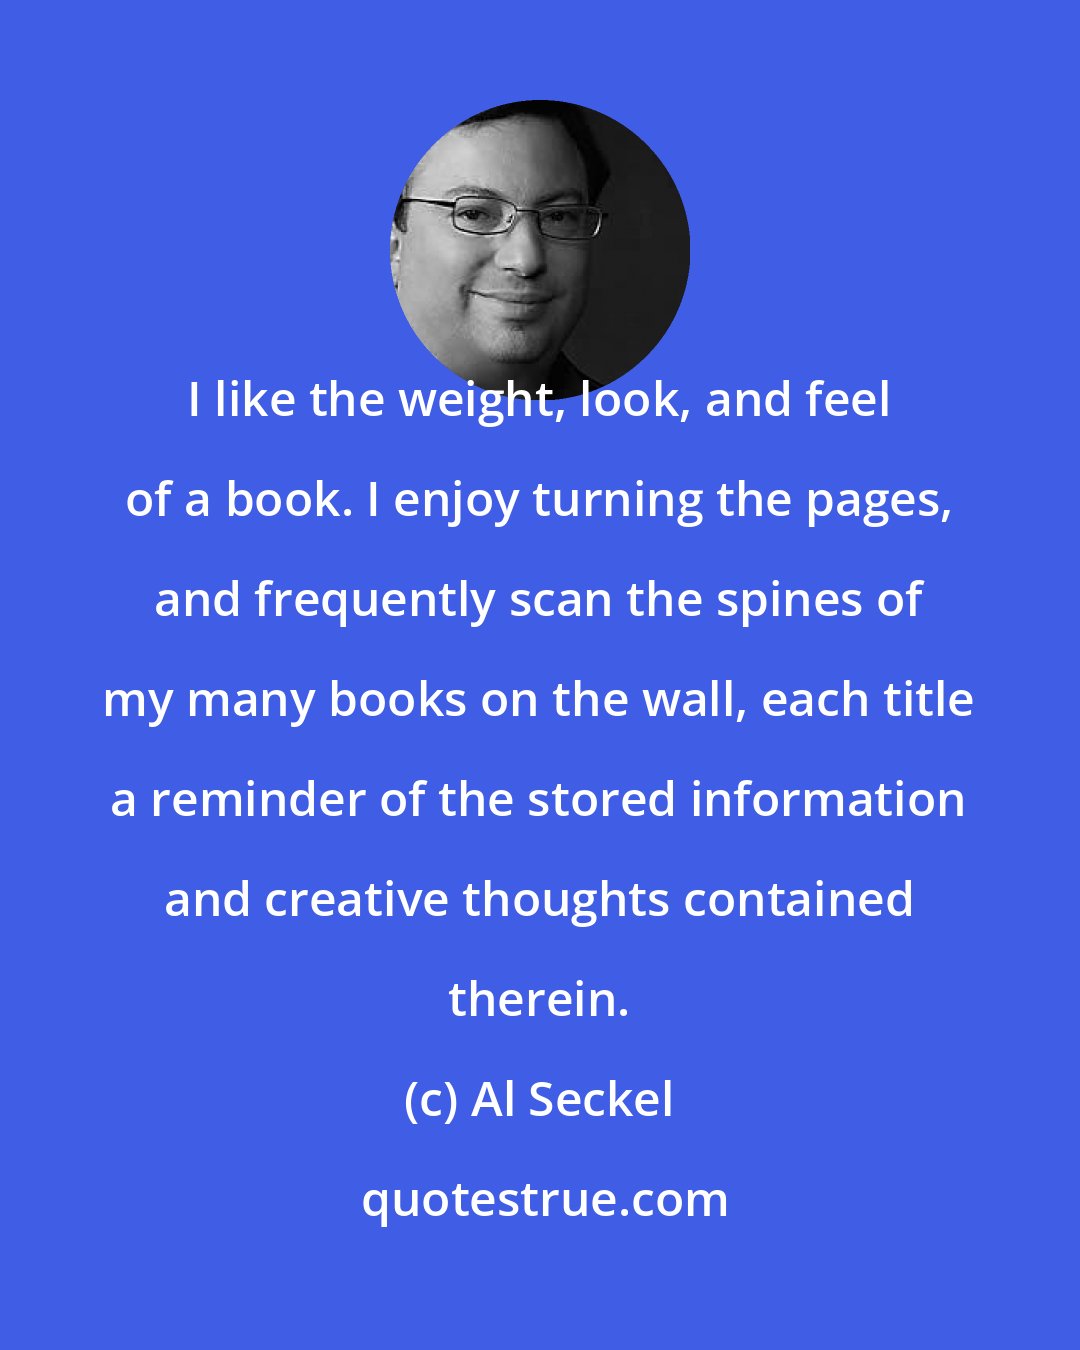 Al Seckel: I like the weight, look, and feel of a book. I enjoy turning the pages, and frequently scan the spines of my many books on the wall, each title a reminder of the stored information and creative thoughts contained therein.